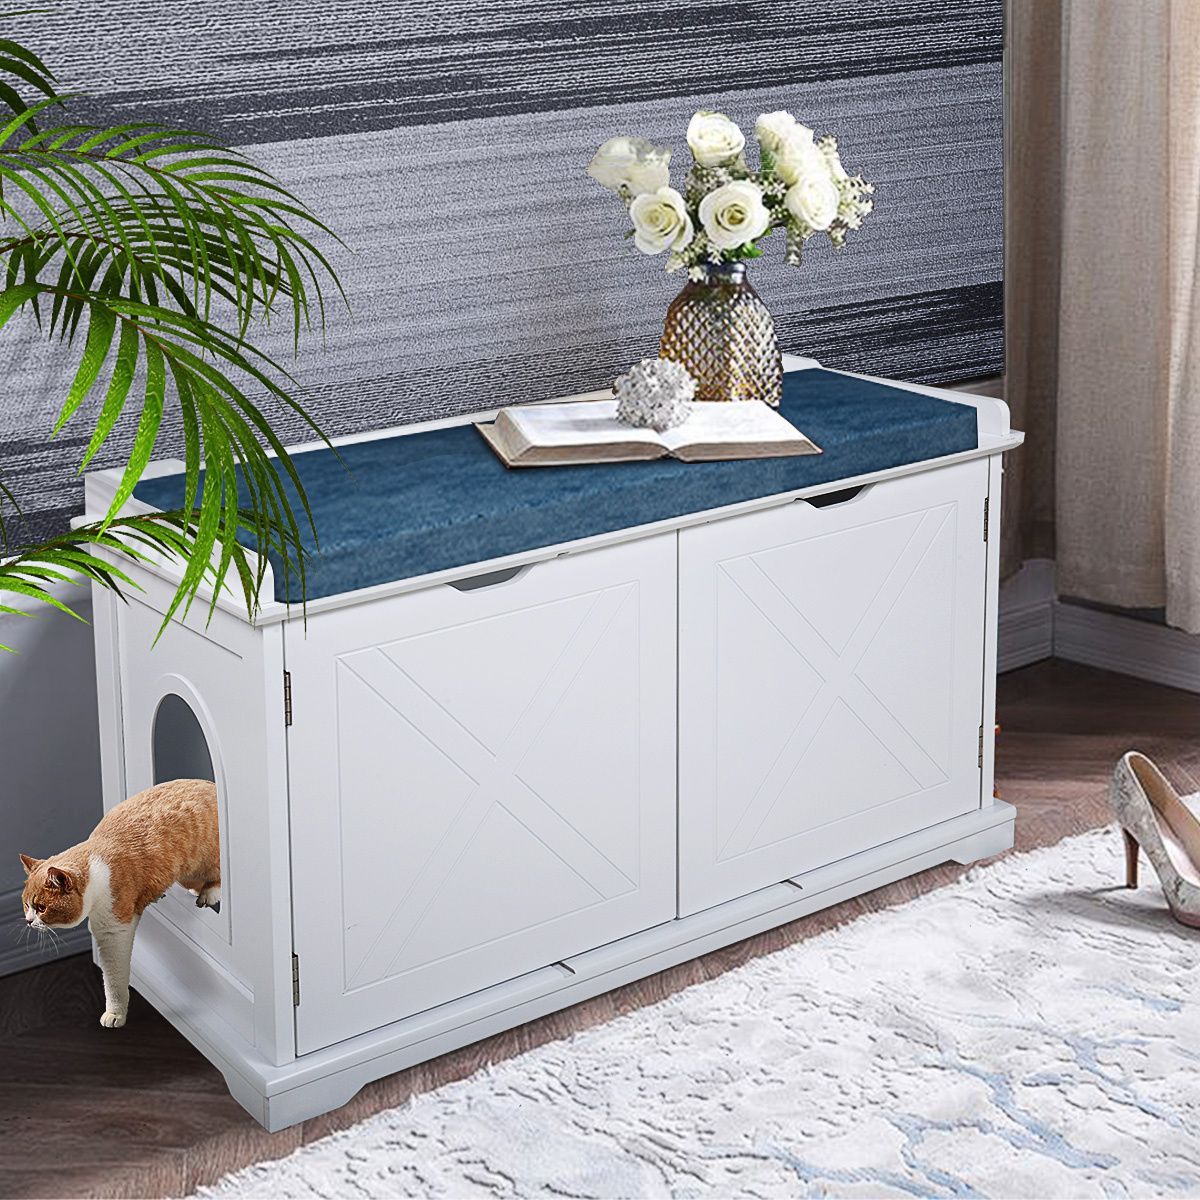 Complete Cat Products carry a high-quality enclosed litter box for your convivences. Discover a wide selection of litter box enclosure for your cat. Our enclosures are crafted with durable materials ensuring long lasting use. #catlitter #enclosure